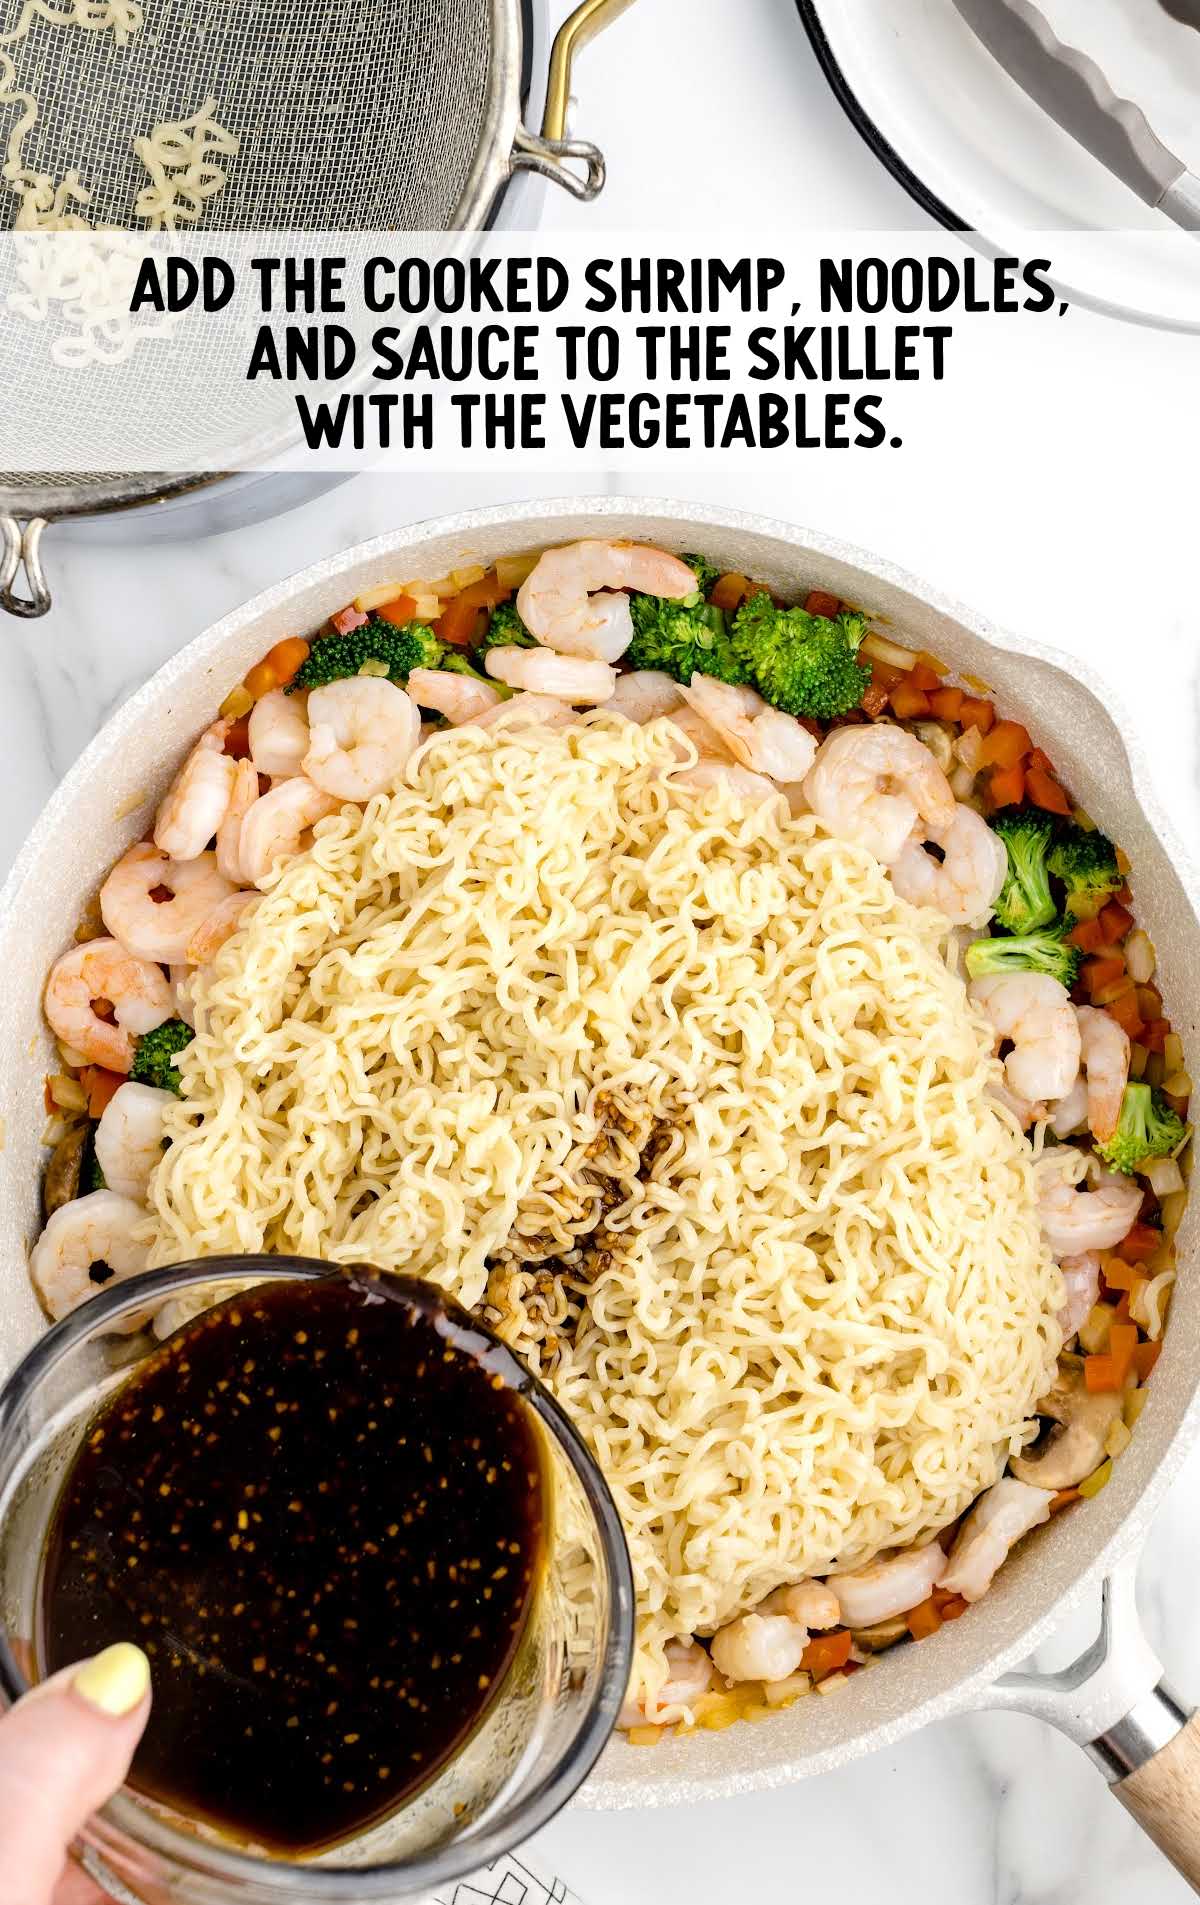 shrimp, noodles, and sauce added to the vegetables